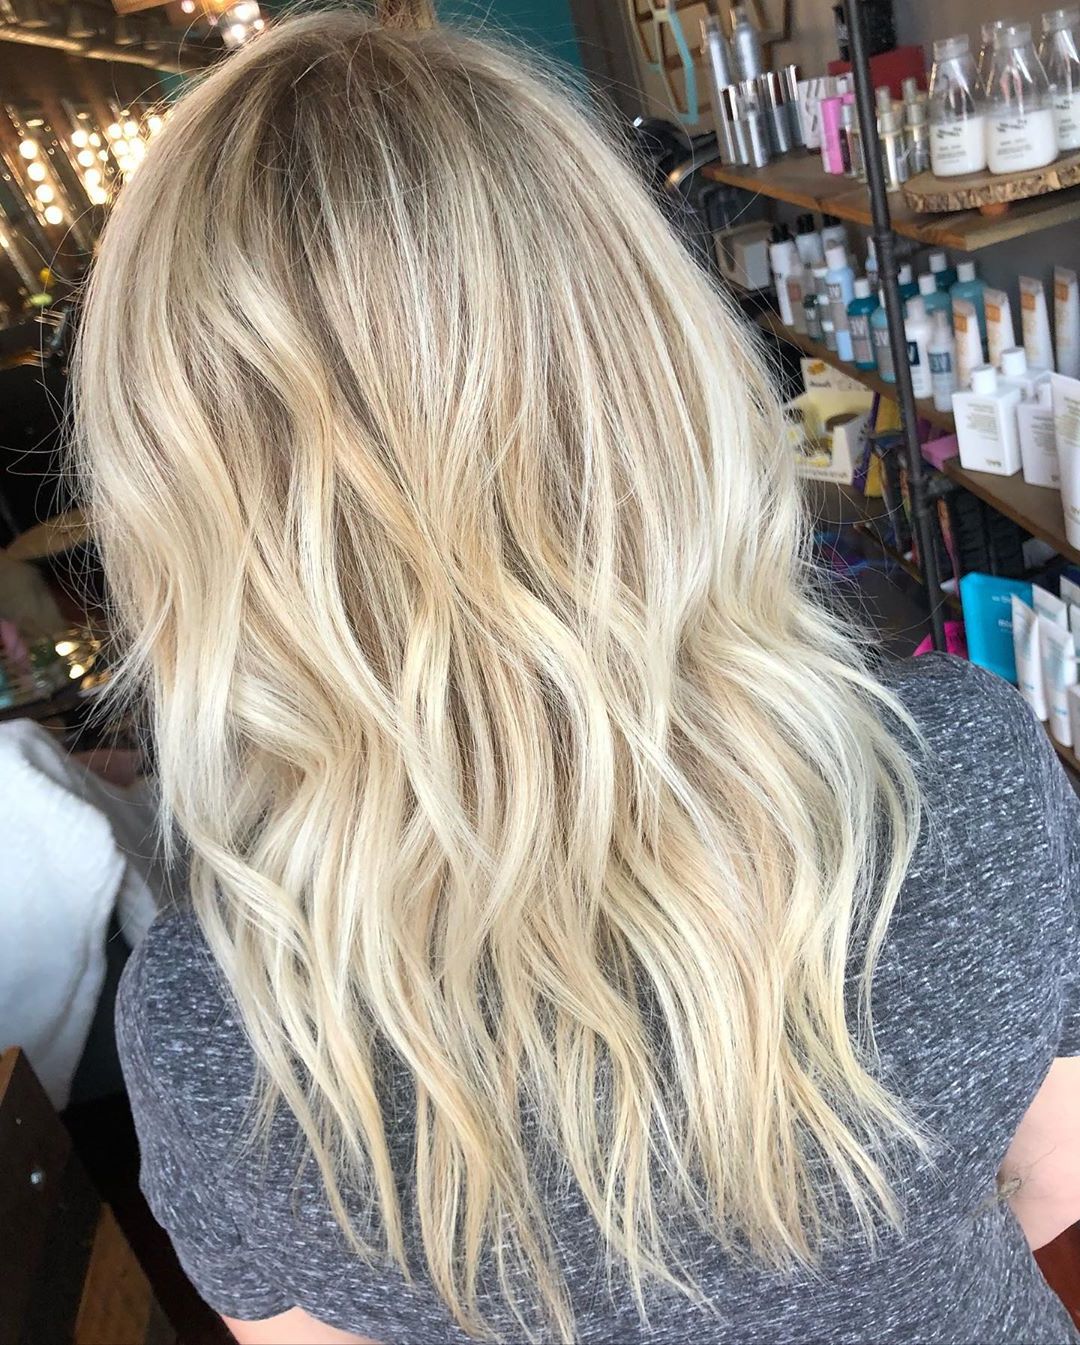 9 New Blonde Balayage Hairstyles You'll Love! – Her Style Code Inside Warm Blonde Balayage Hairstyles (View 1 of 20)